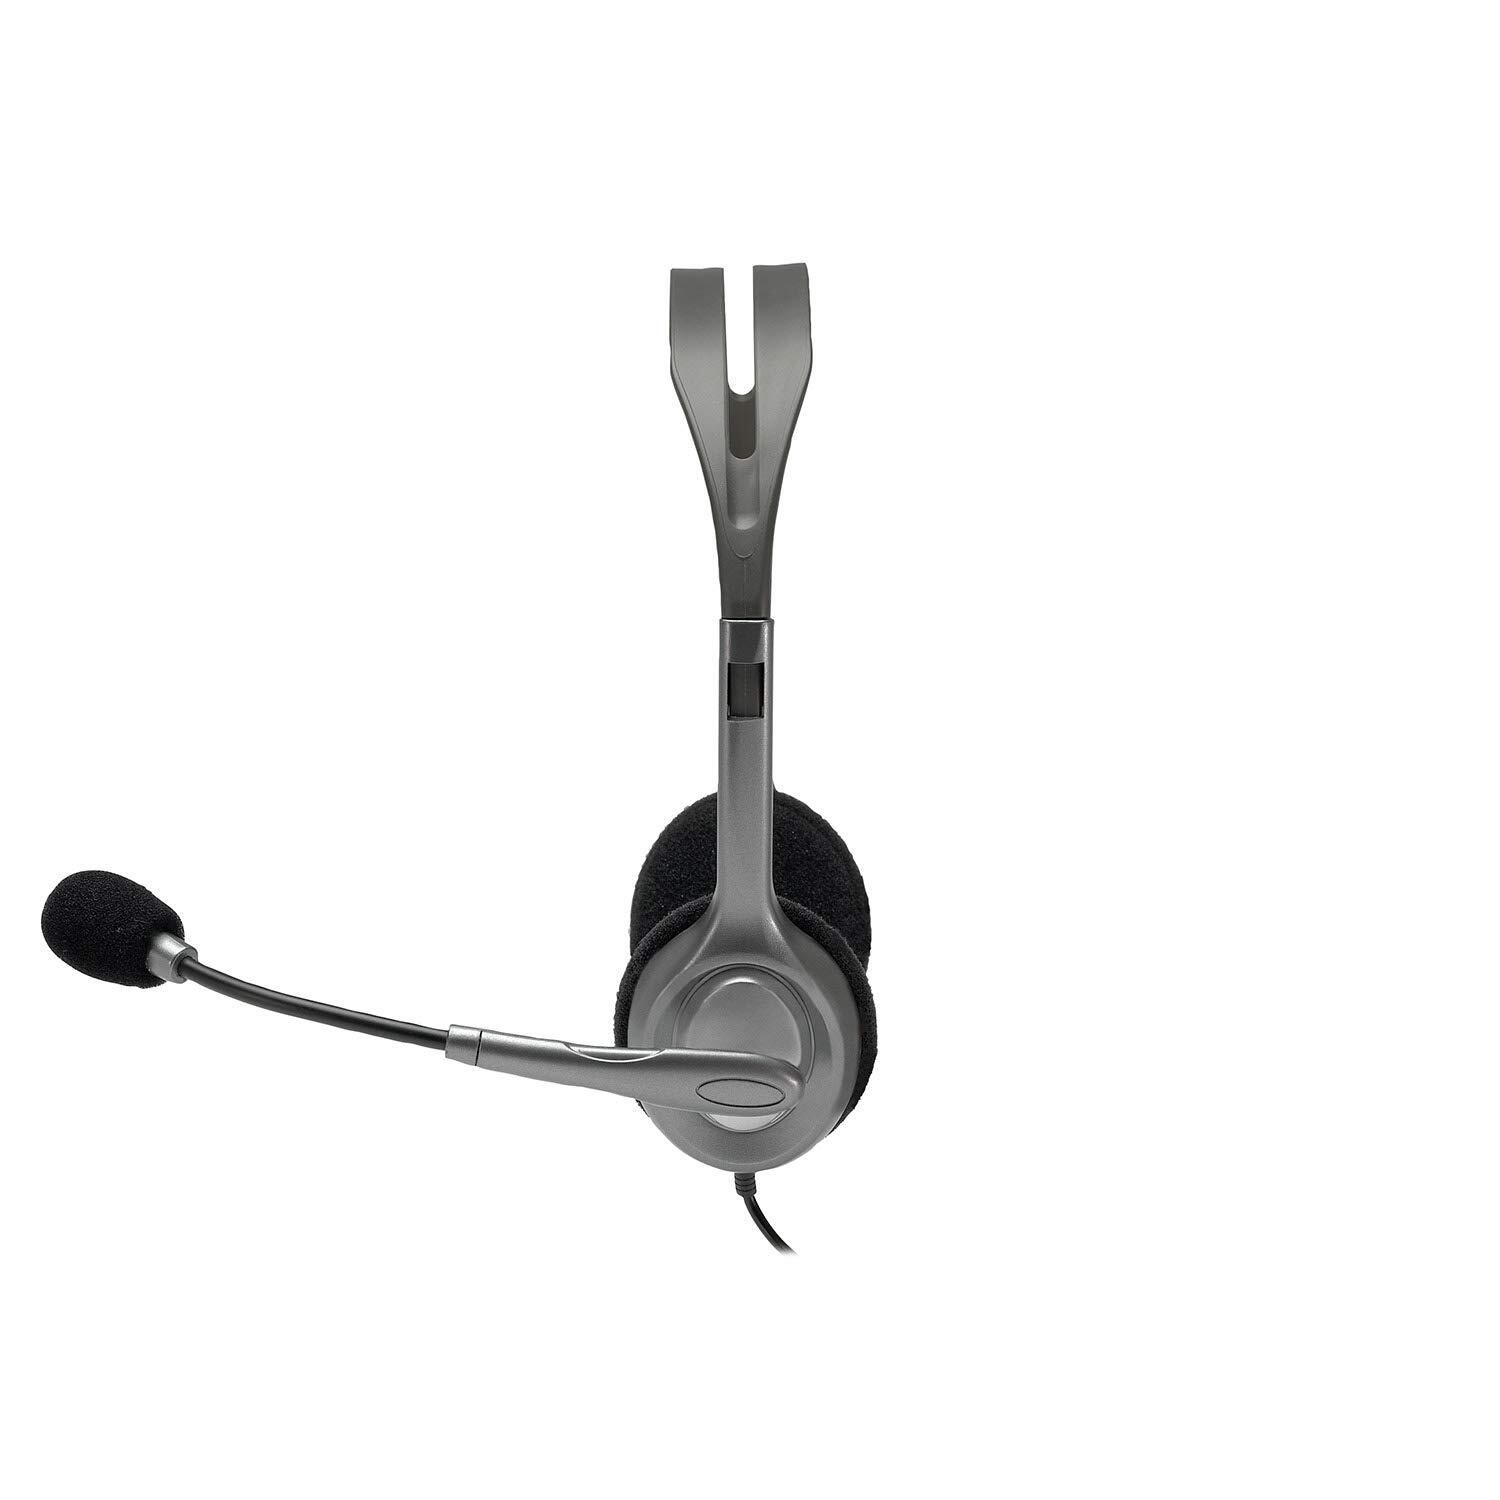 Logitech H110 Wired On Ear Headphones With Mic, Stereo With Noise-Cancelling,3.5-Mm Dual Audio Jack, Pc/Mac/Laptop- Black